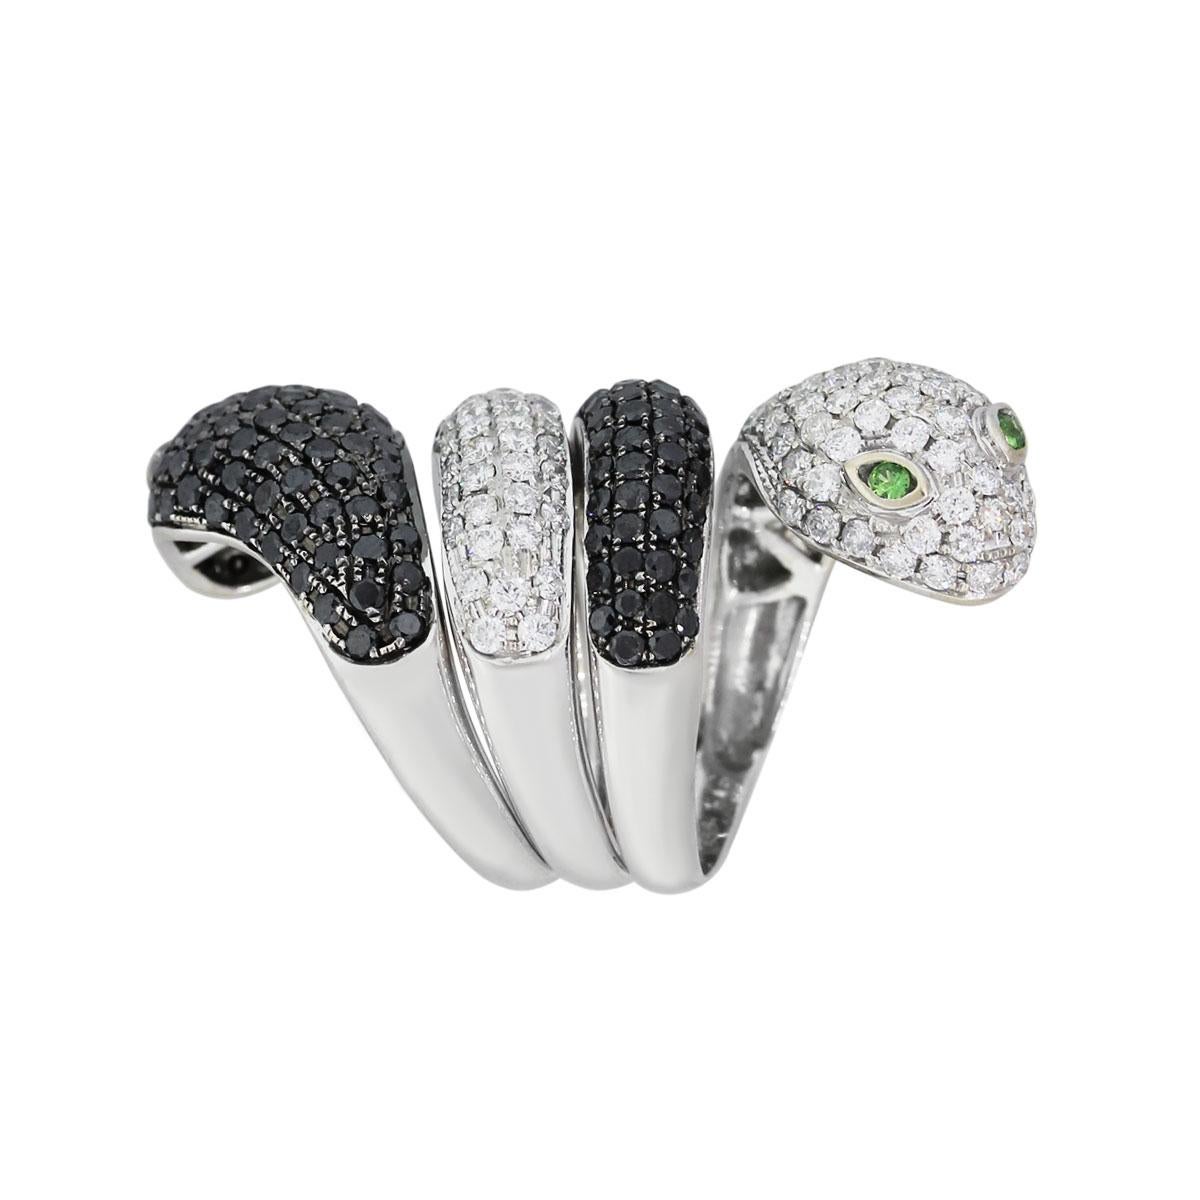 Material: 18k white gold
Diamond Details: Approximately 3.33 ctw of round brilliant white and black diamonds. White diamonds are G/H in color and VS in clarity.
Gemstone Details: Approximately 0.10ctw of round shape emeralds
Ring Size: 7.75
Ring